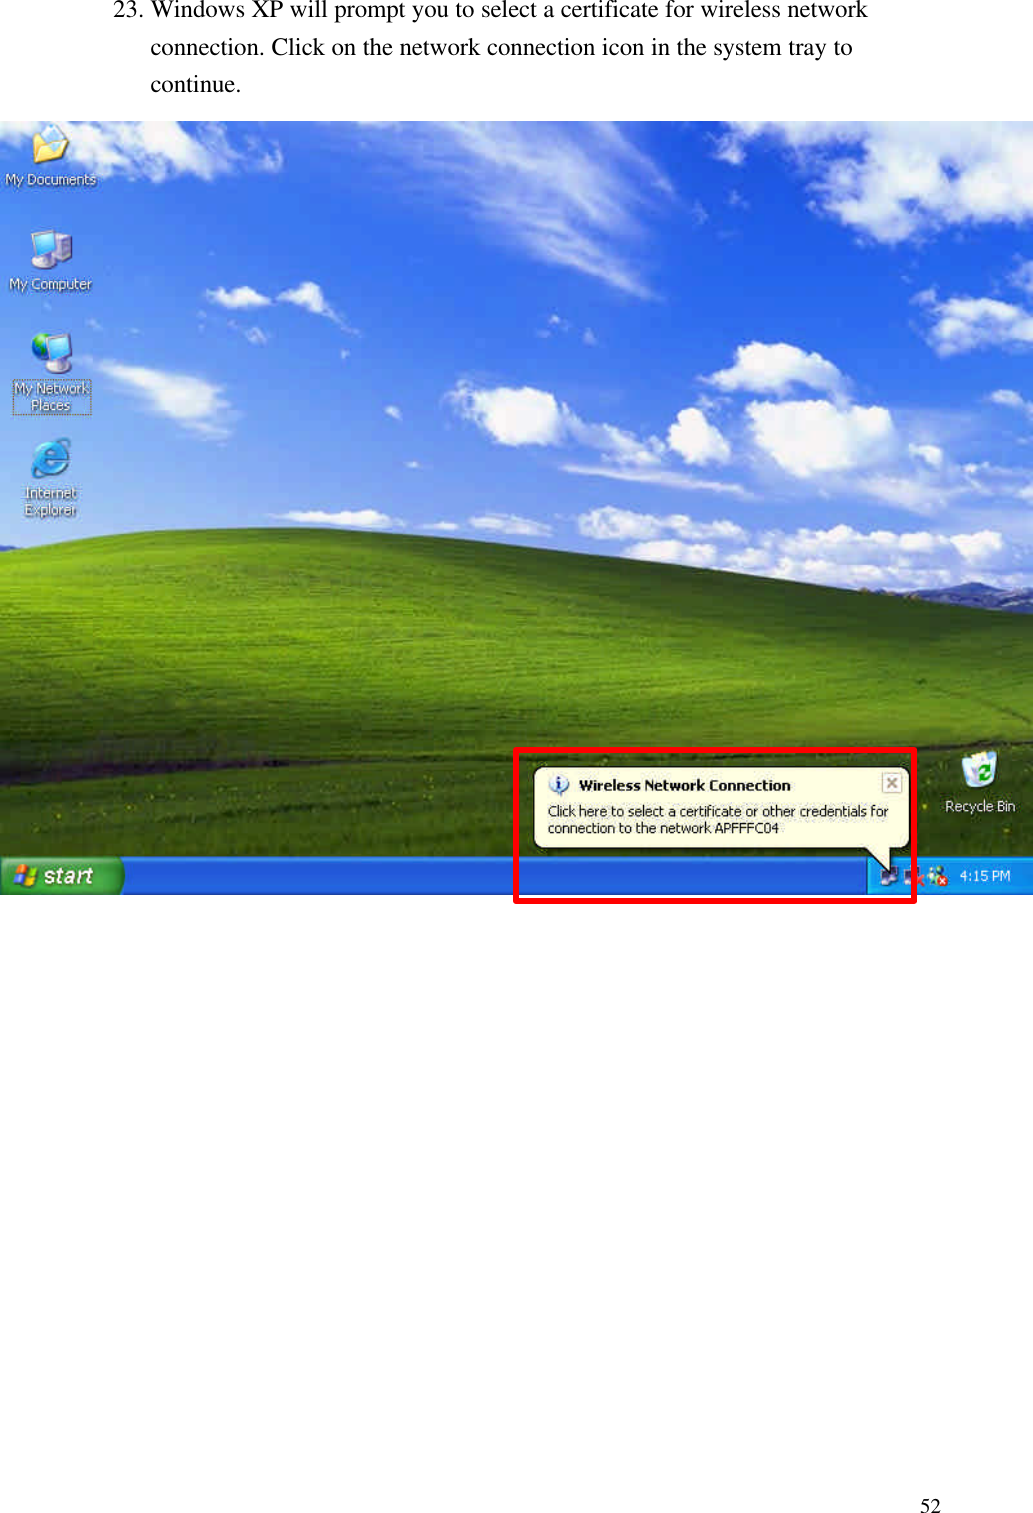  5223. Windows XP will prompt you to select a certificate for wireless network connection. Click on the network connection icon in the system tray to continue.                         